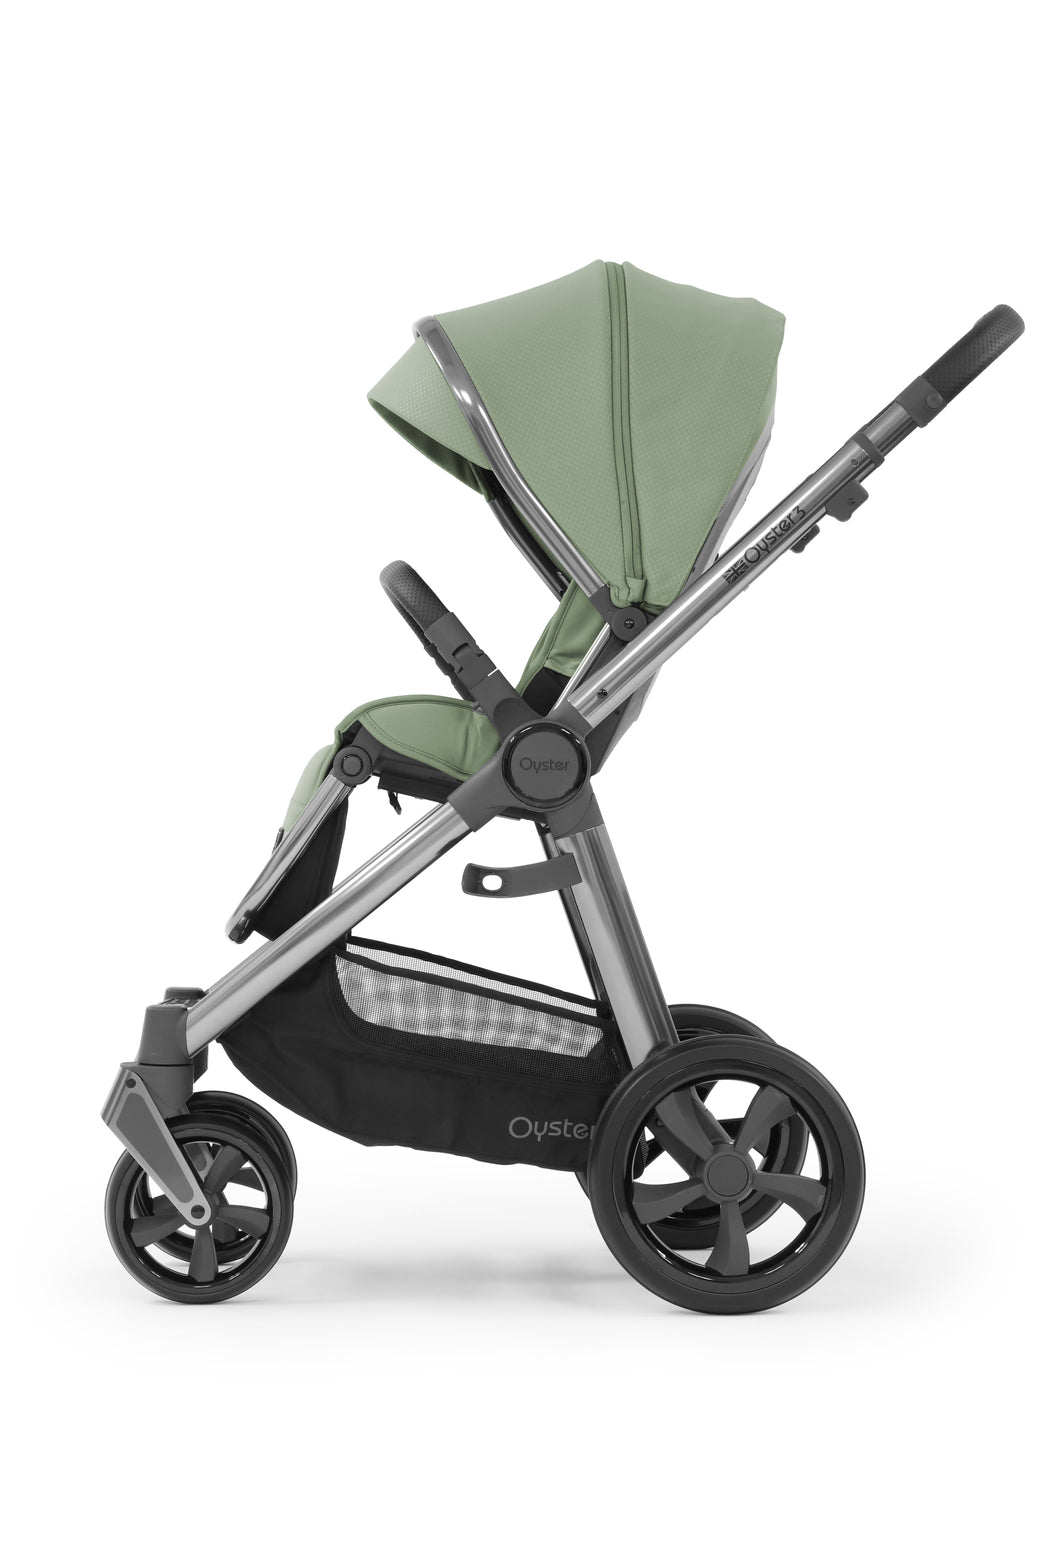 Babystyle Oyster 3 Luxury 7 Piece Travel System Bundle With Pebble 360 - Spearmint -  | For Your Little One